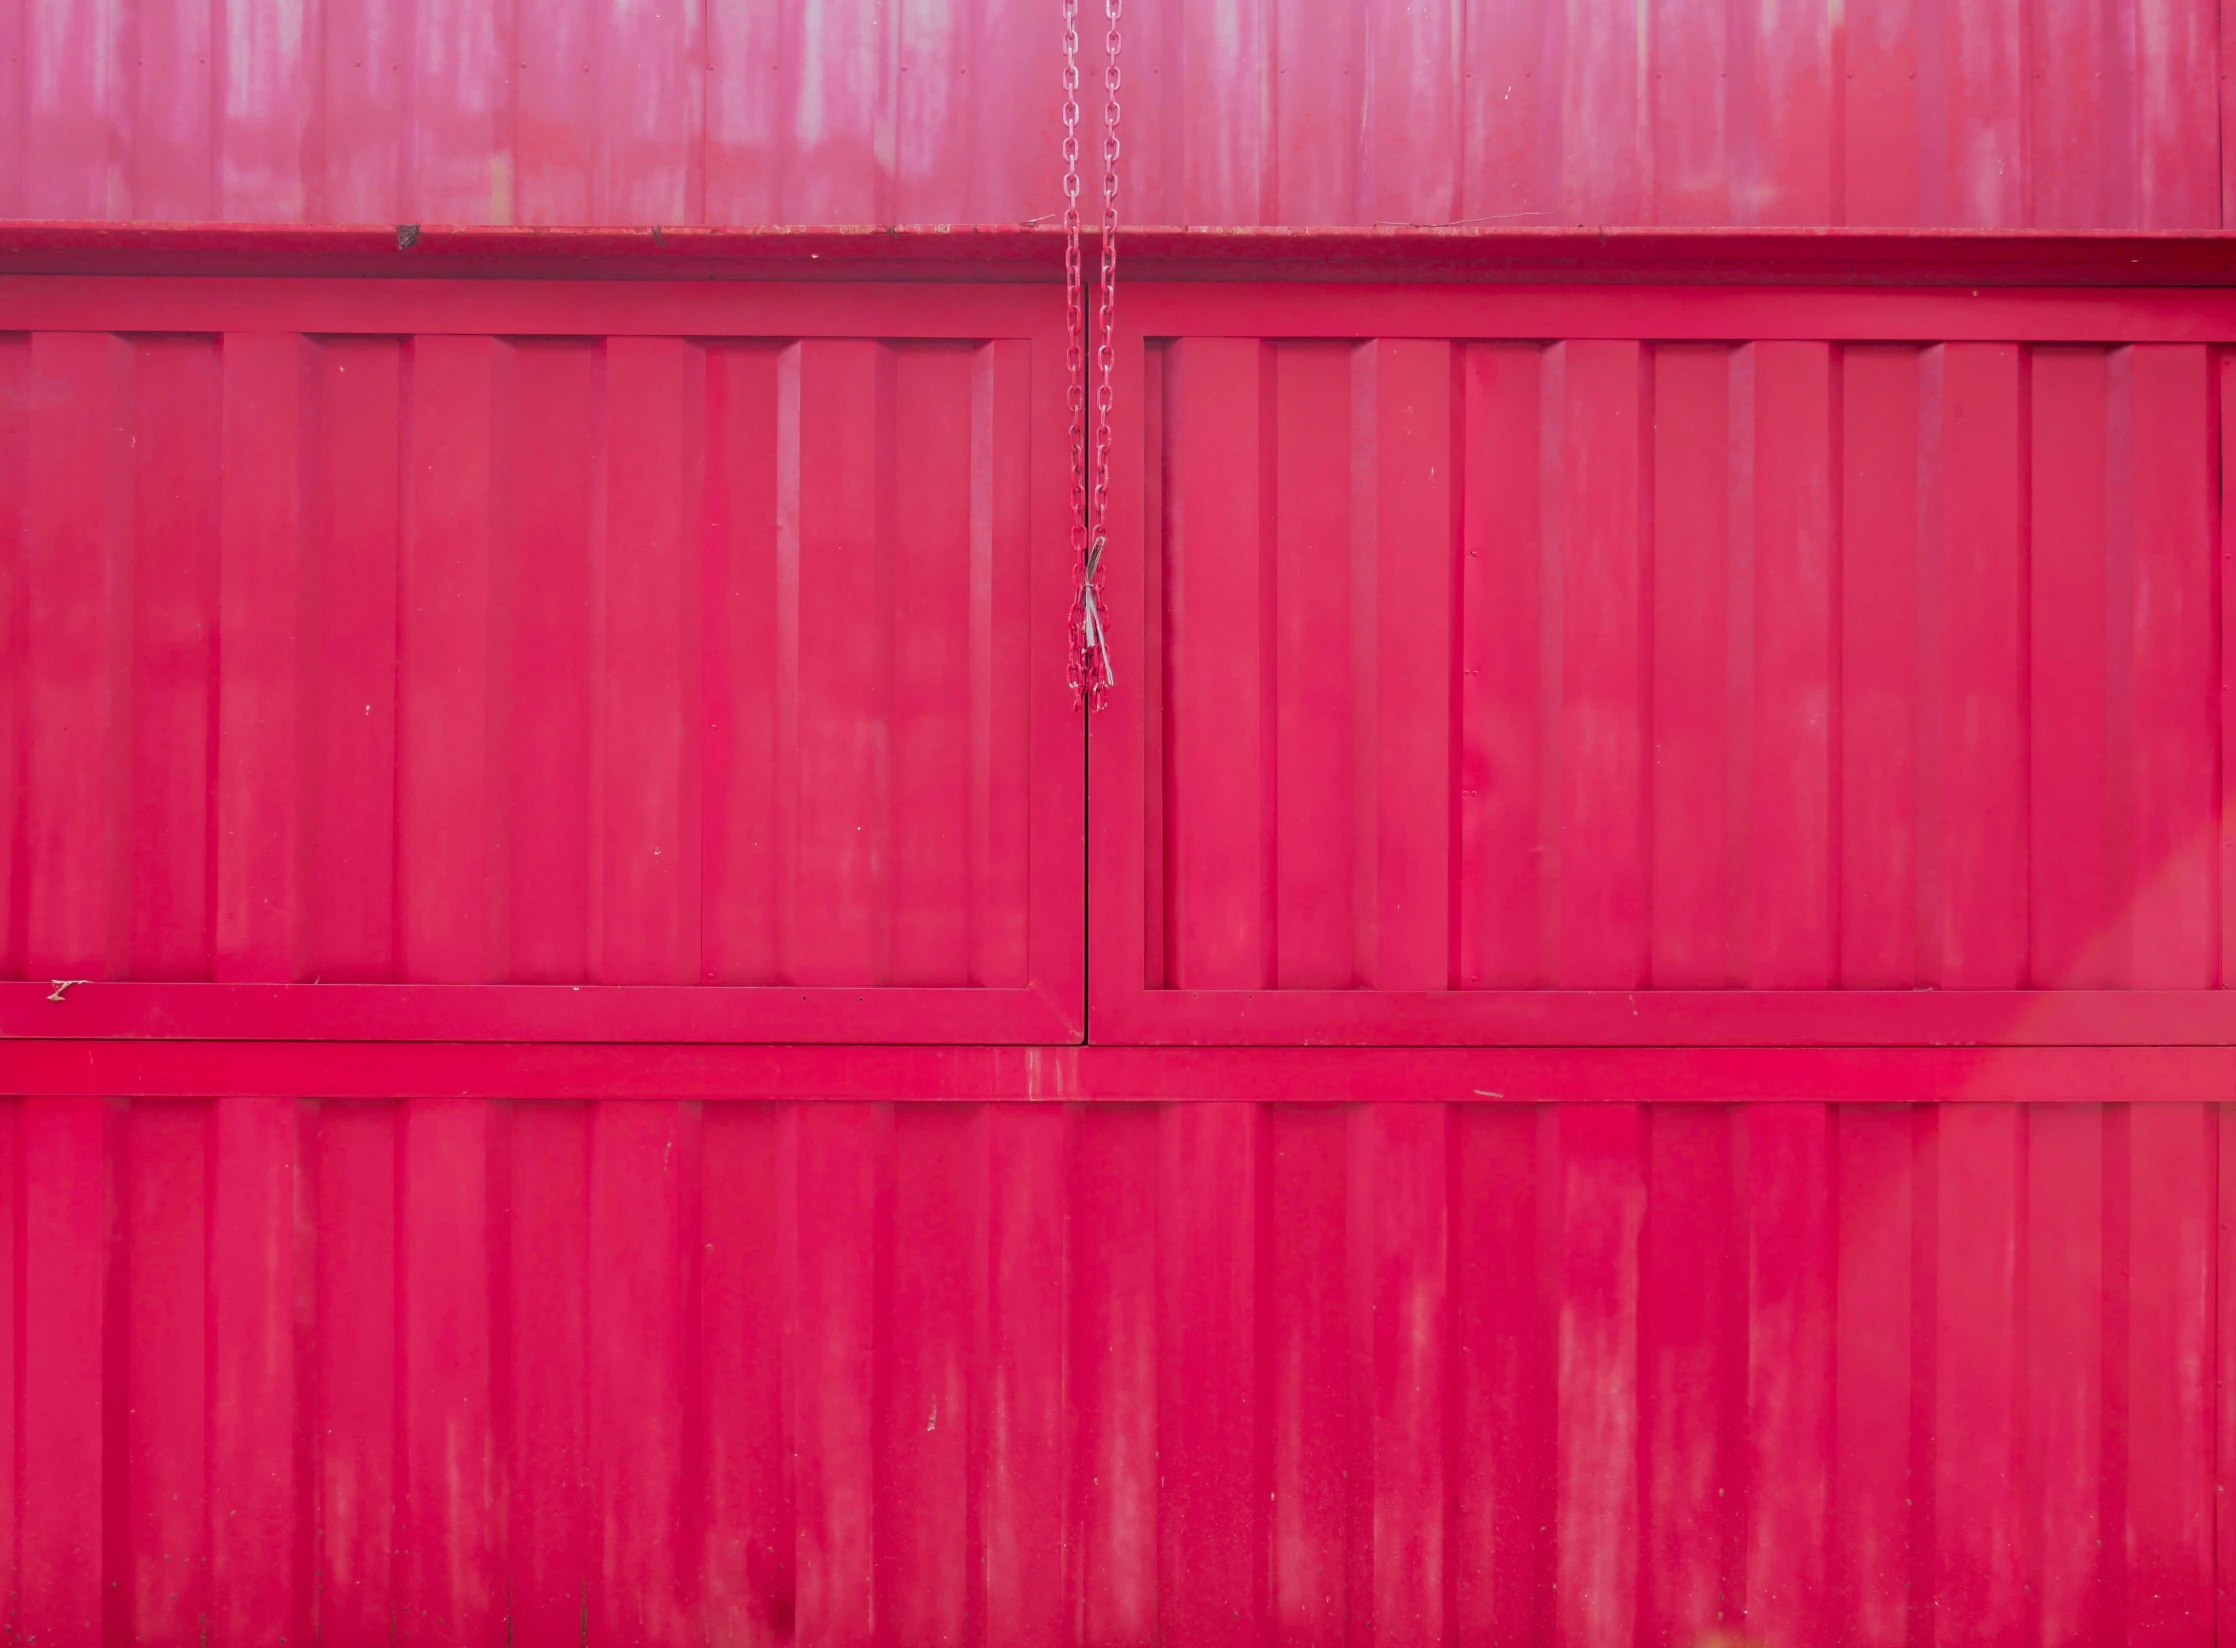 the color of the fence is bright pink